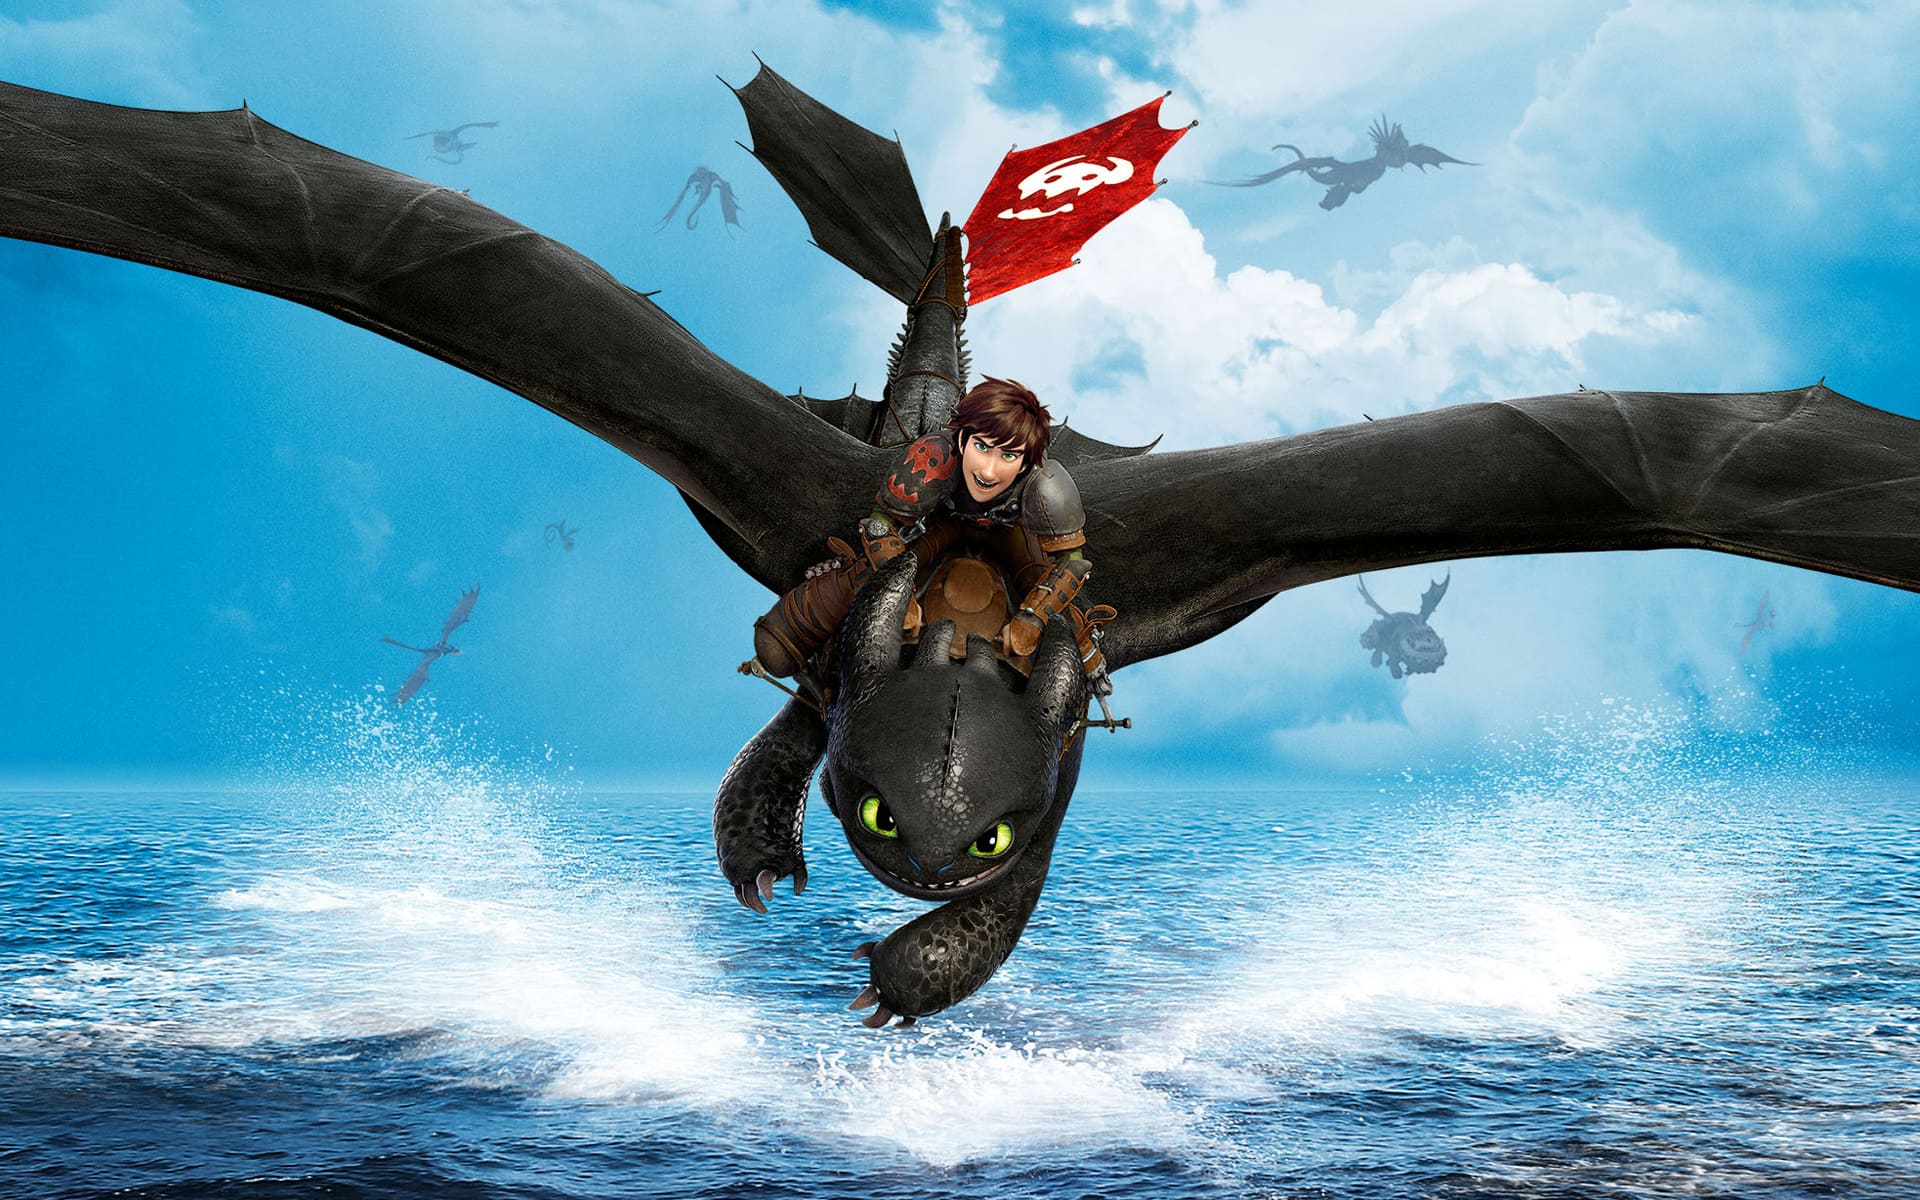 into film school tickets how to train your dragon